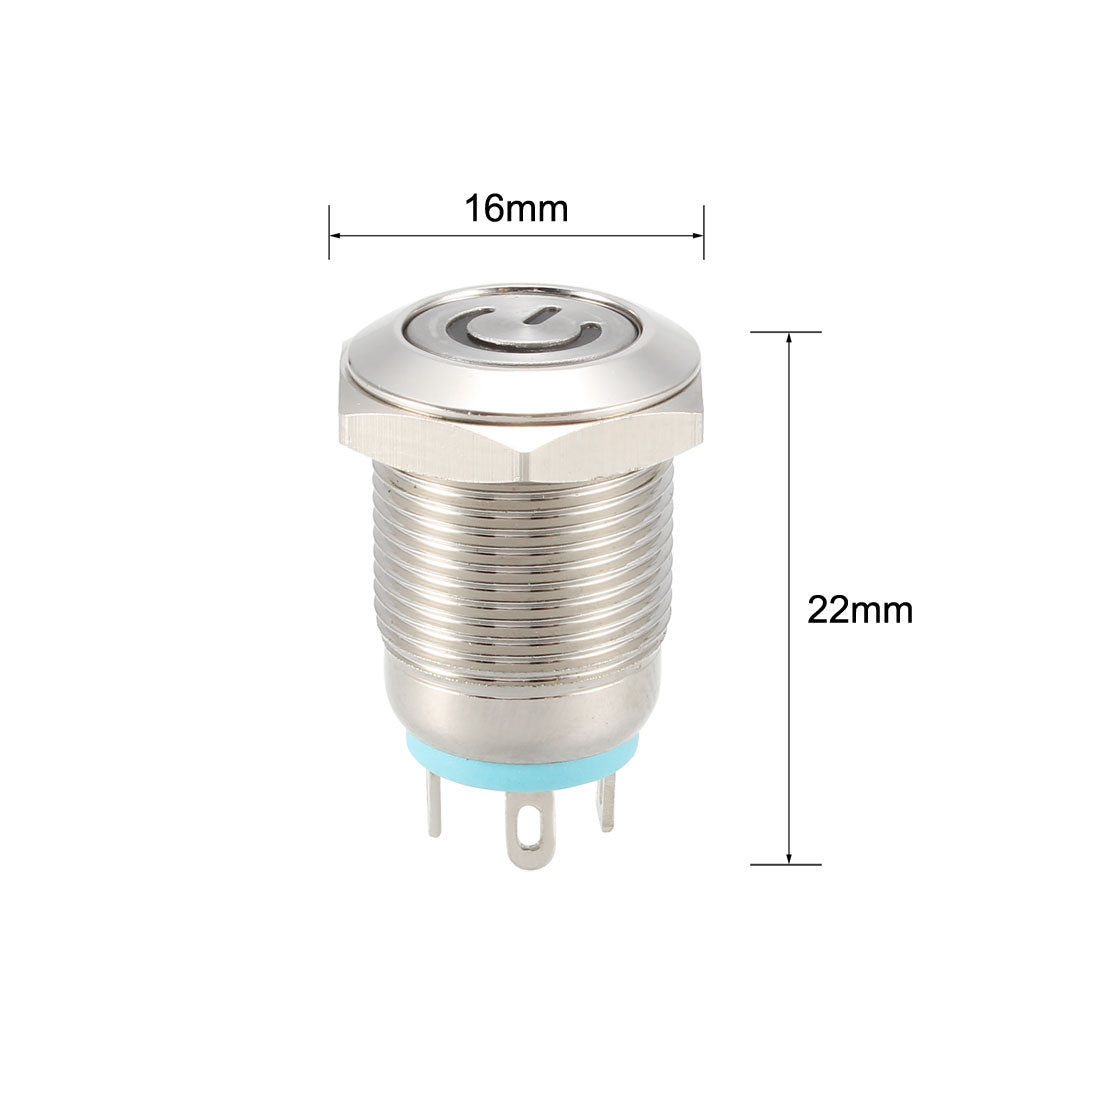 uxcell Uxcell Momentary Metal Push Button Switch Flat Head 12mm Mounting Dia 1NO 3-6V LED Light